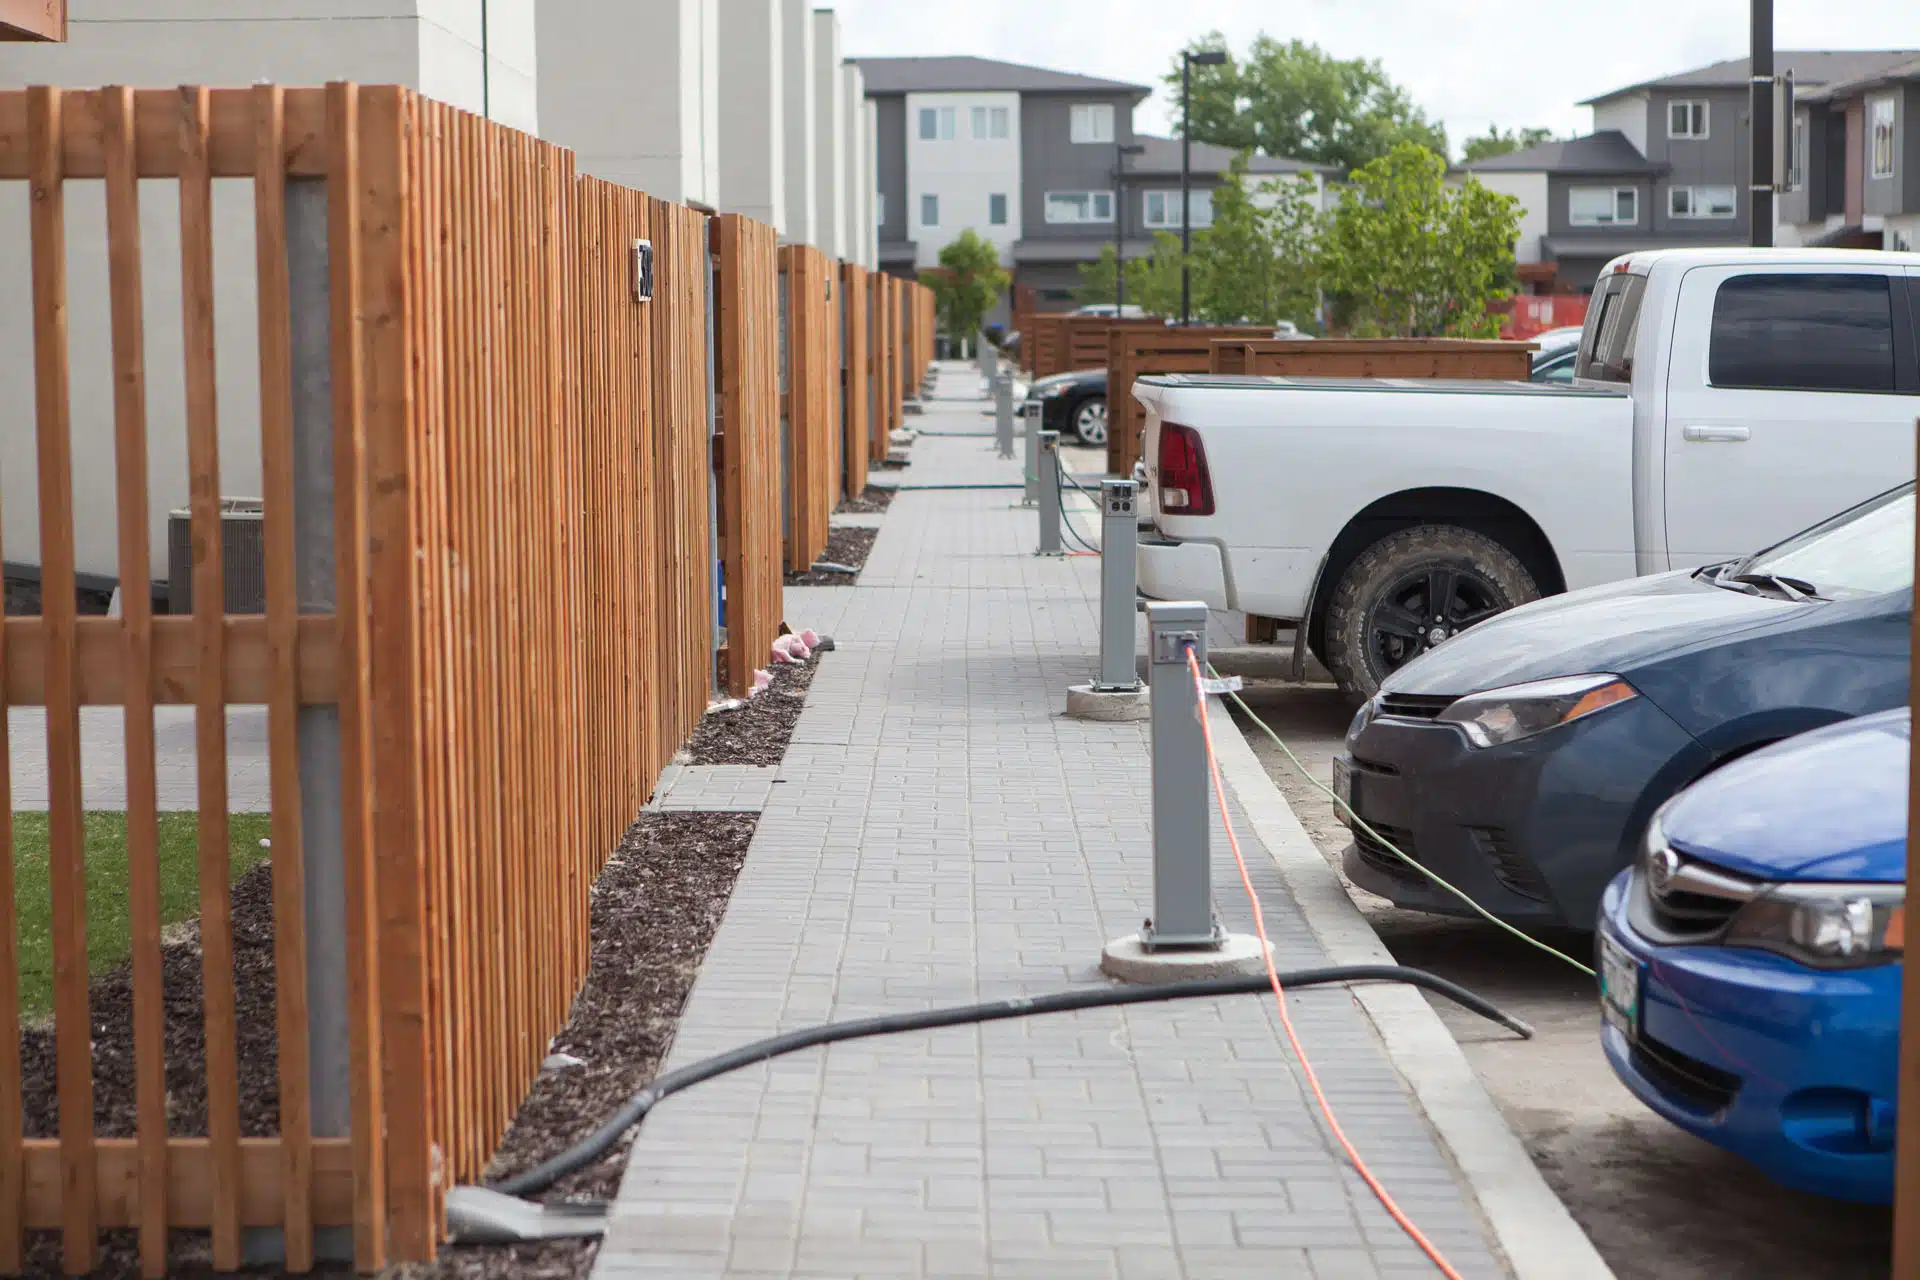 Electric vehicle charging stations in residential area with townhouses
